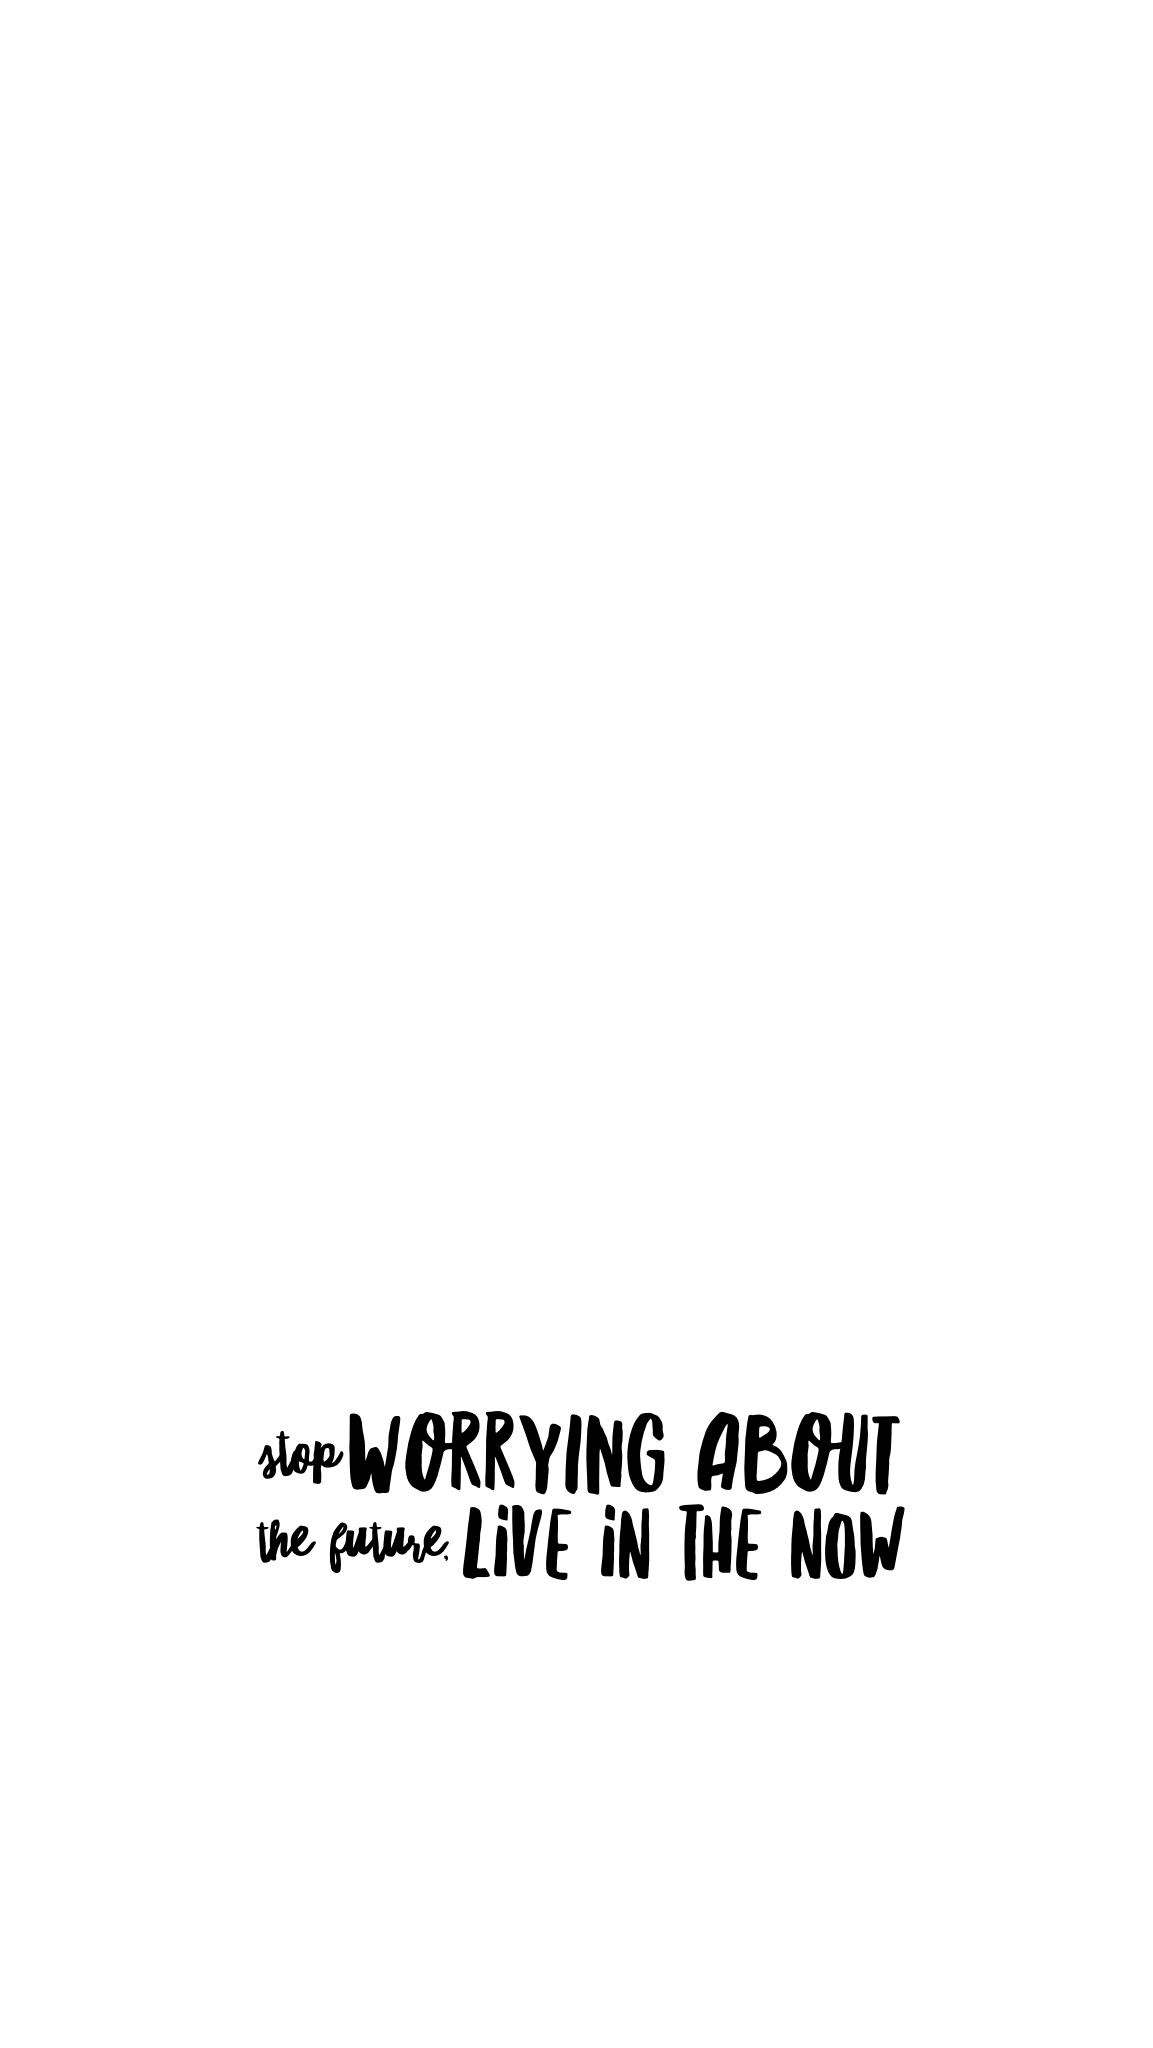 Phone Wallpaper Phone Background Quotes To Live By  Handwriting   1080x1920 Wallpaper  teahubio